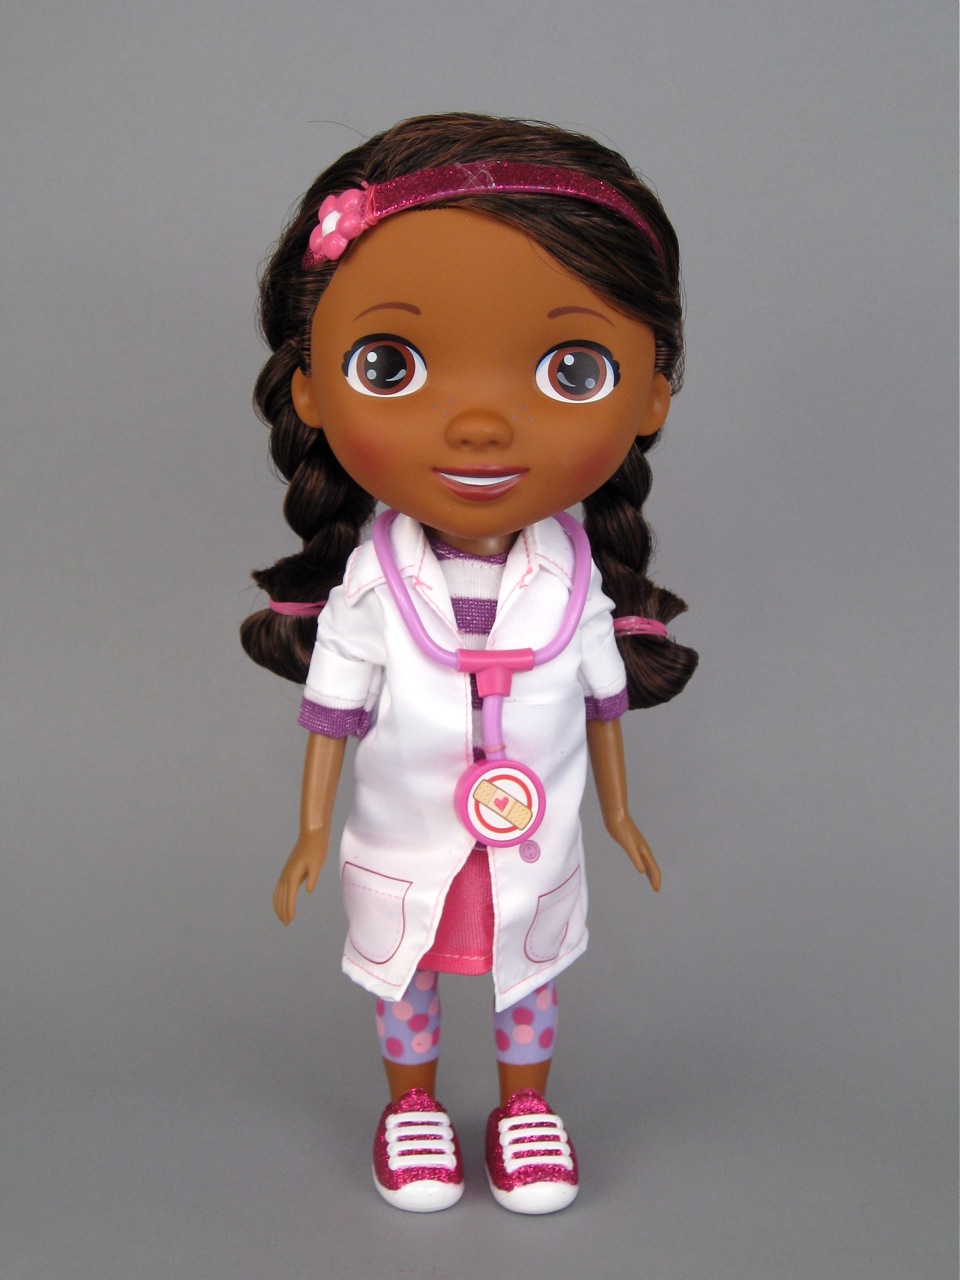 Doc McStuffins doll by Just Play